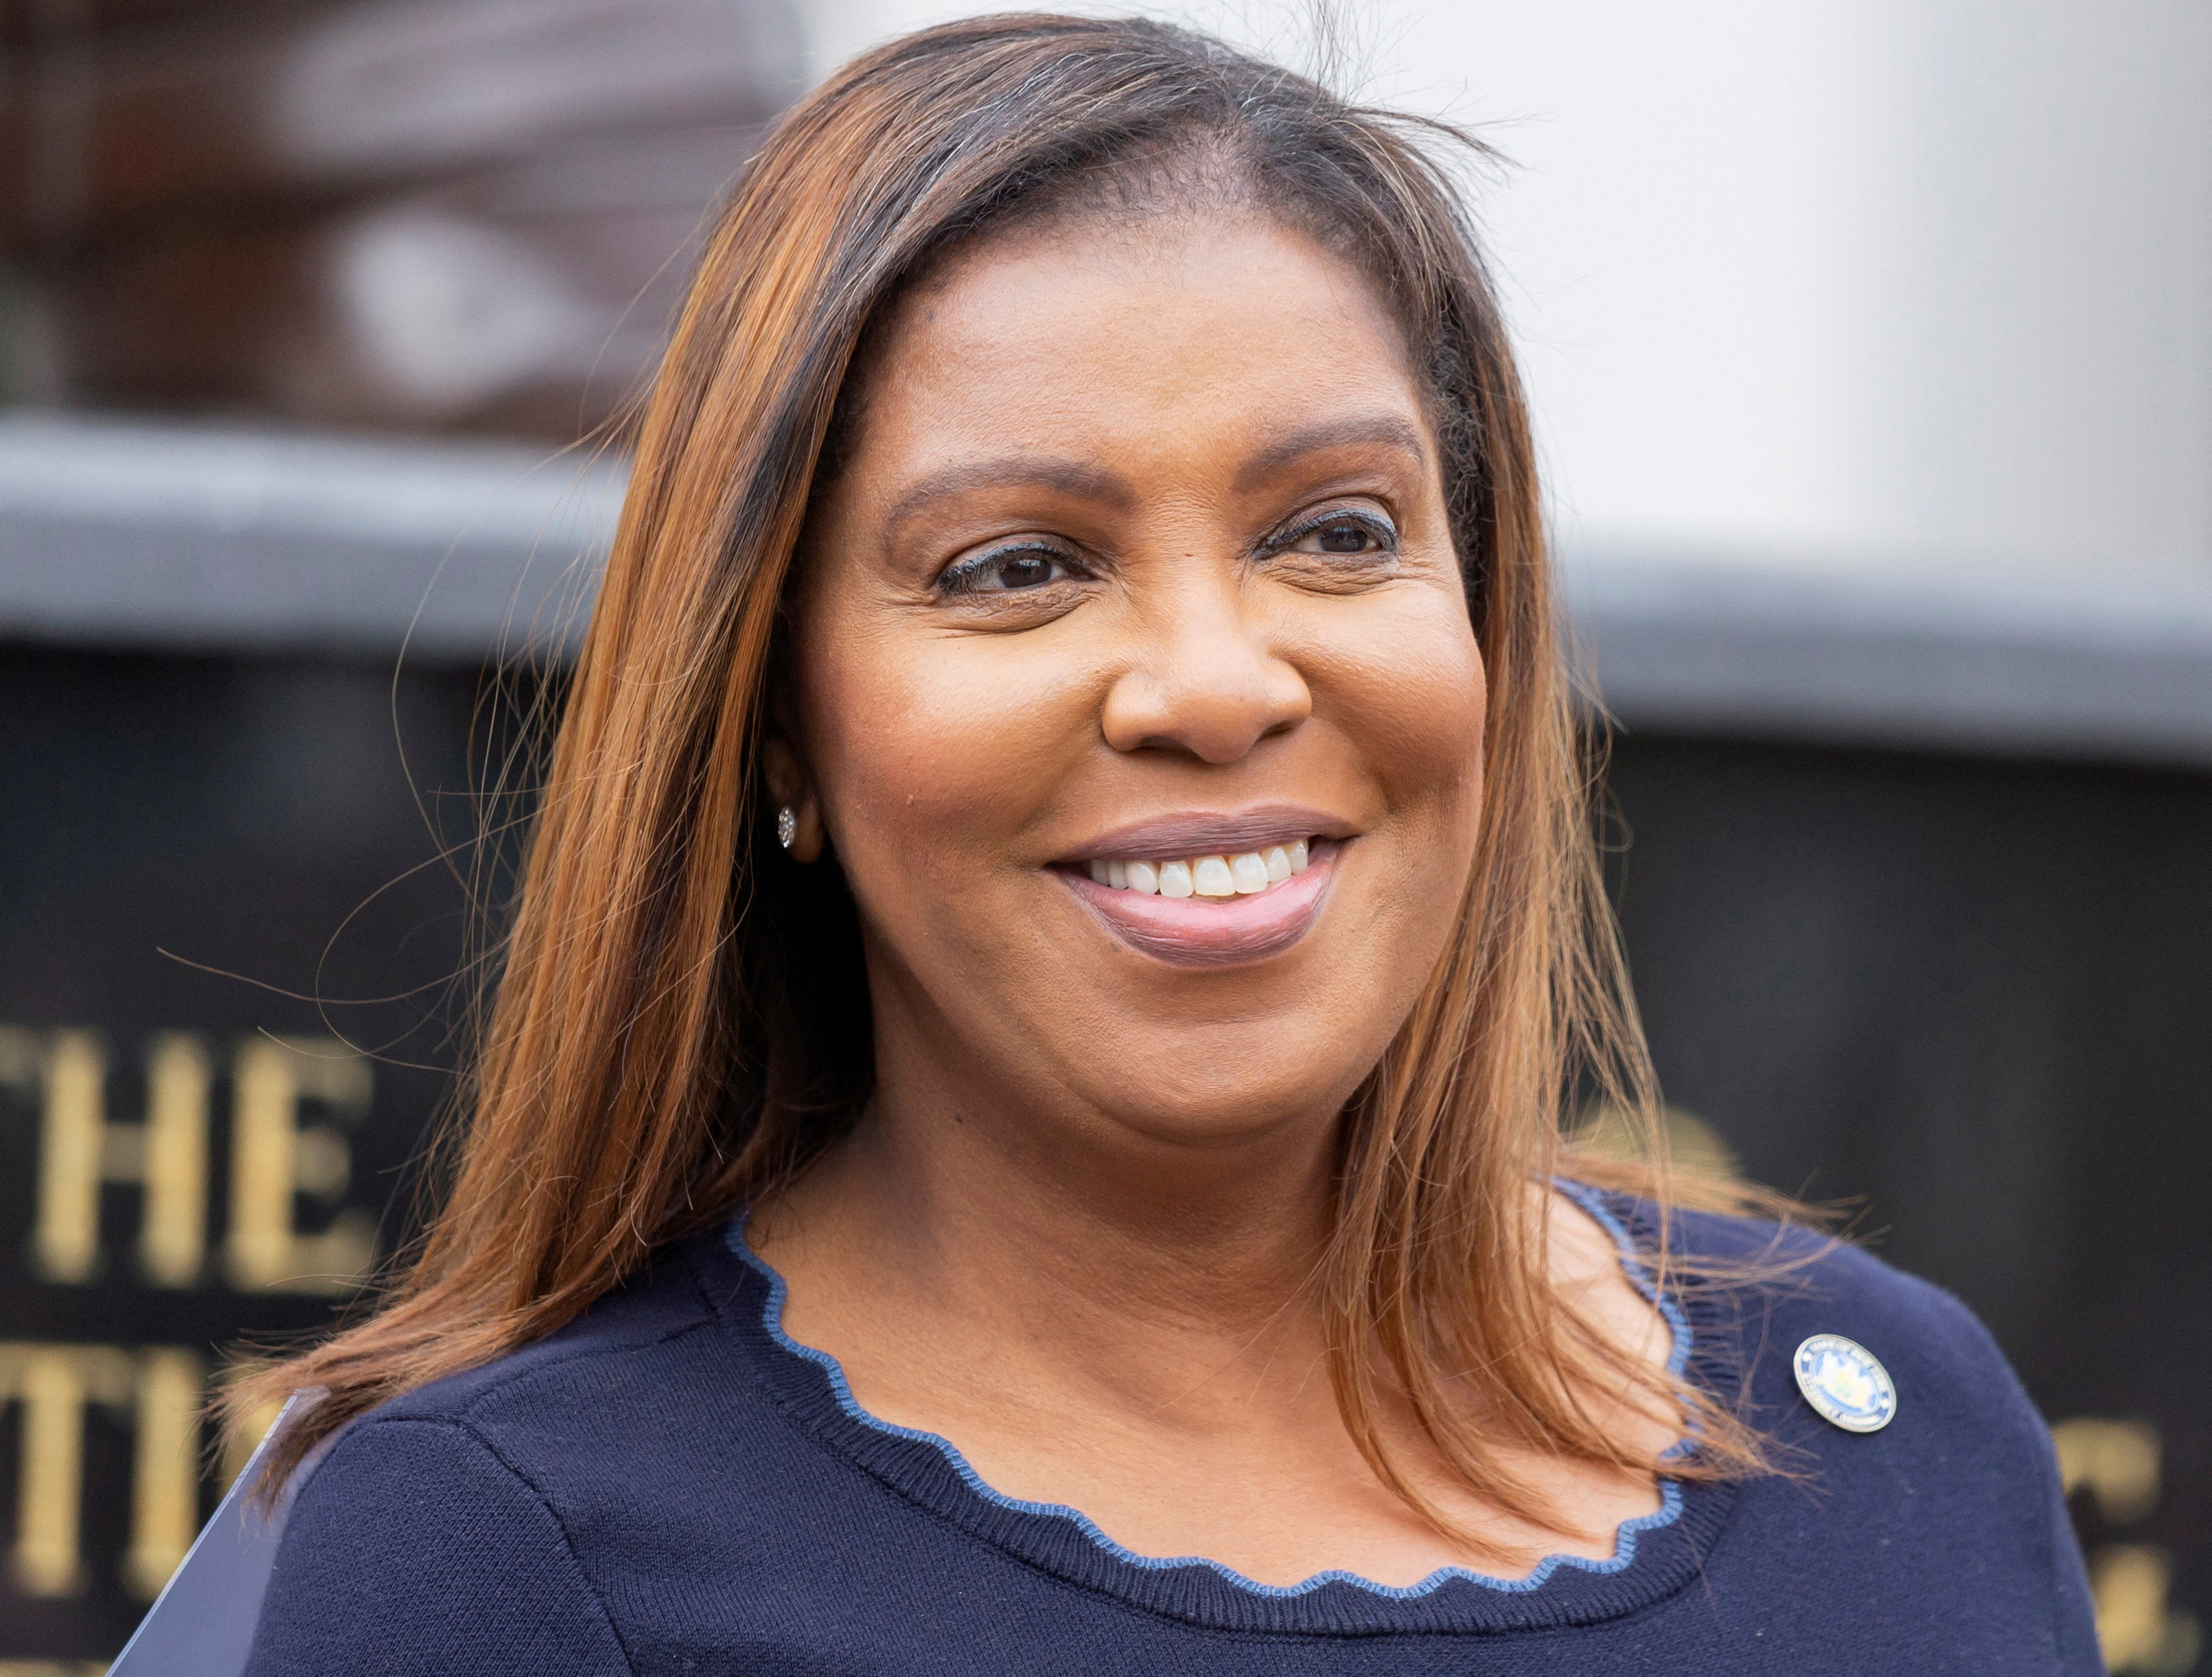 New York State Attorney General Letitia James smiles during an endorsement for governor event